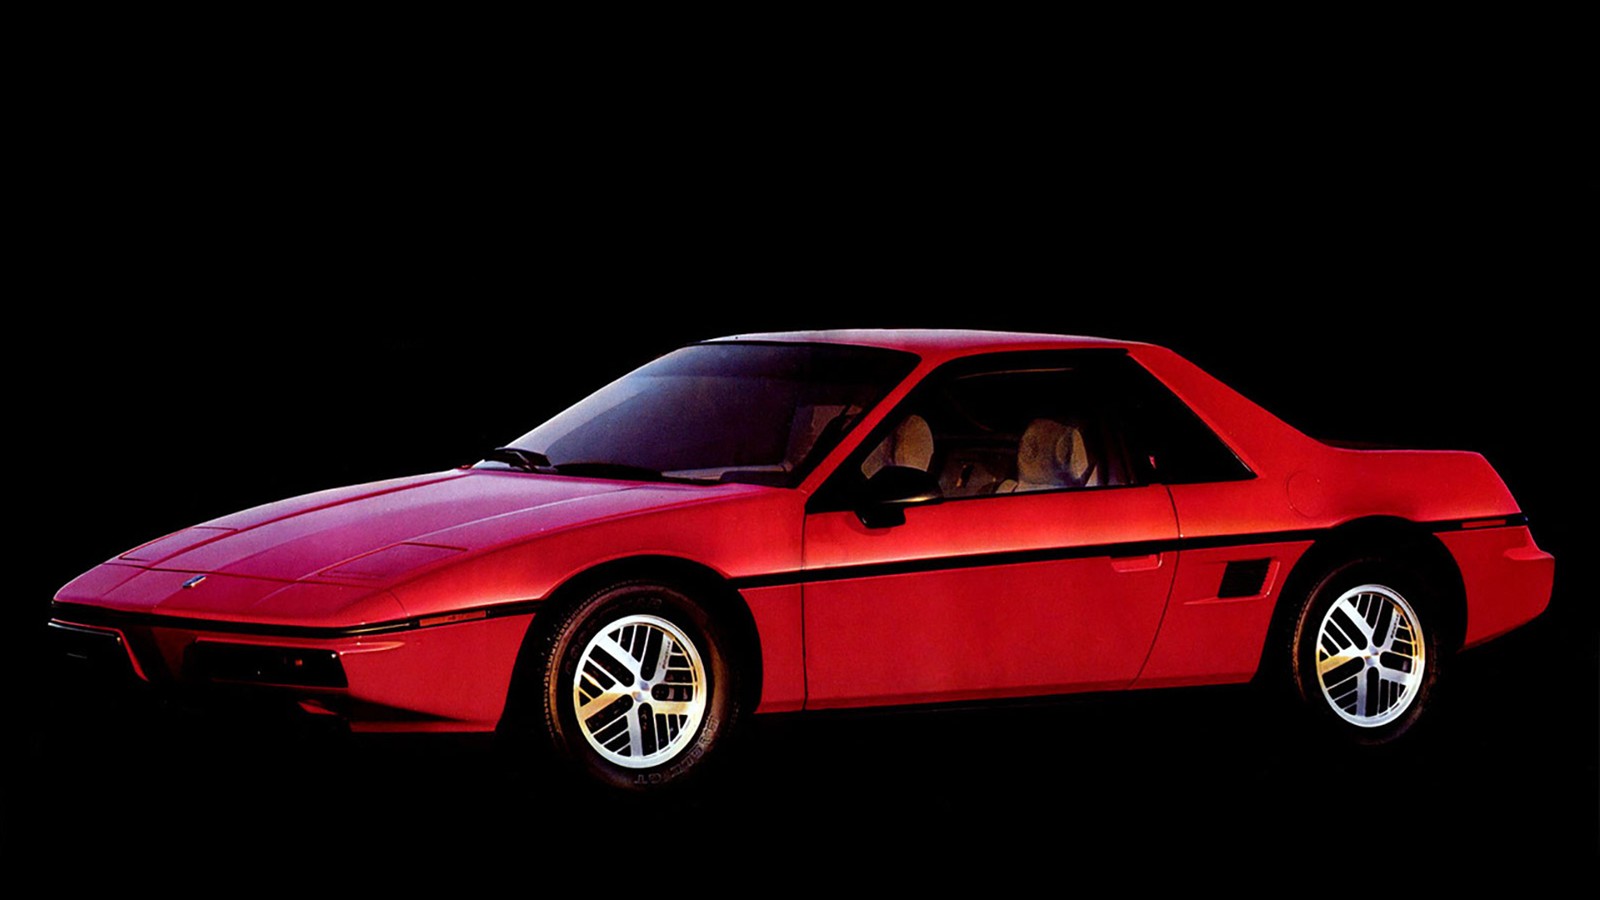 20 cars that prove American muscle wasn’t dead in the 1980s | Classic